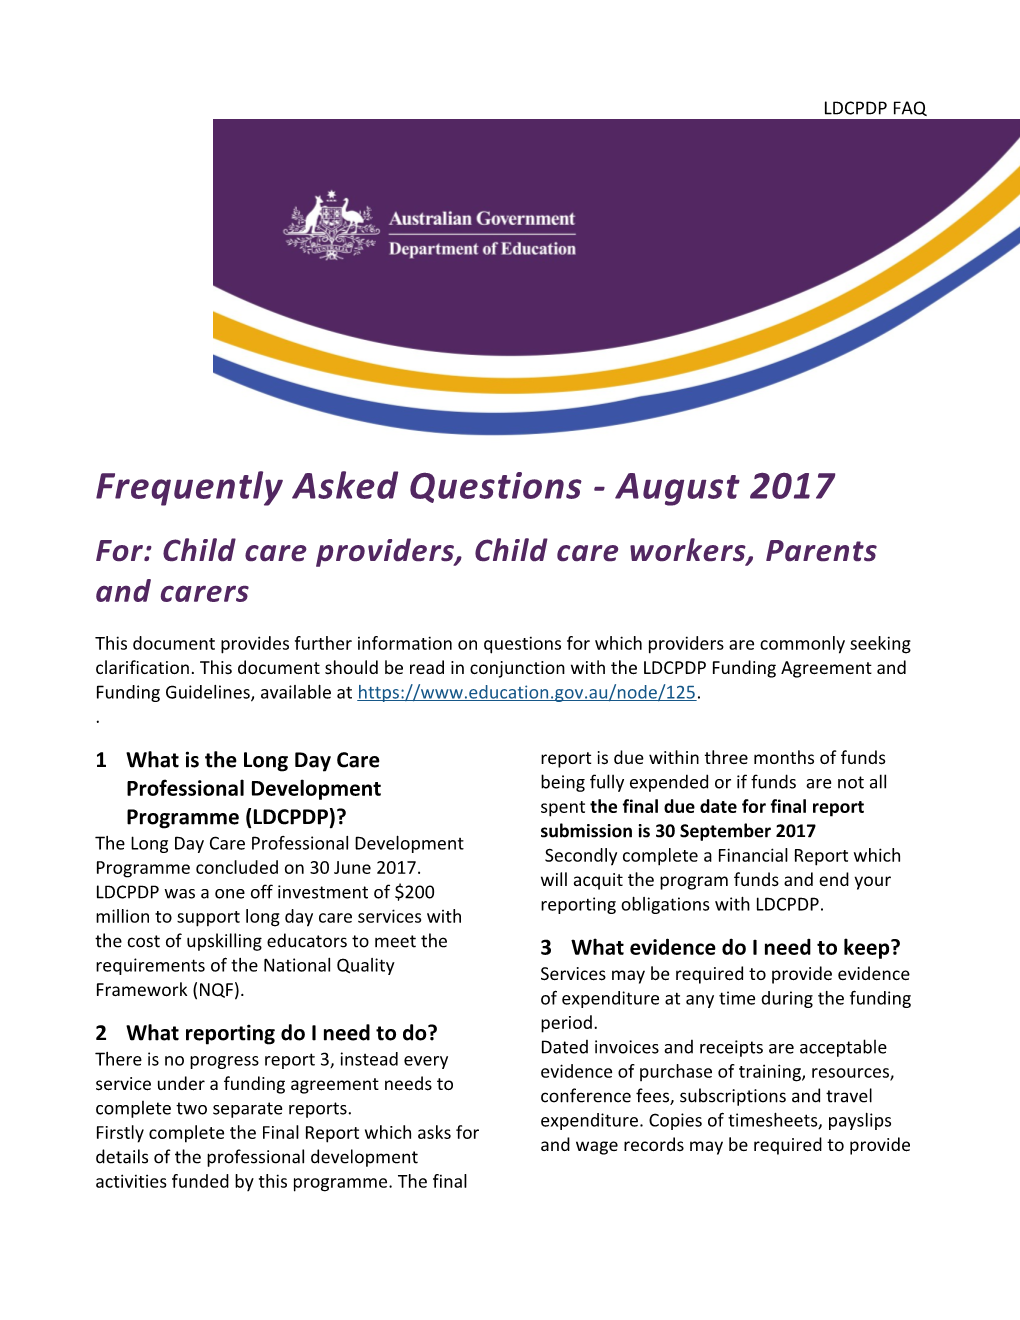 Frequently Asked Questions - August 2017